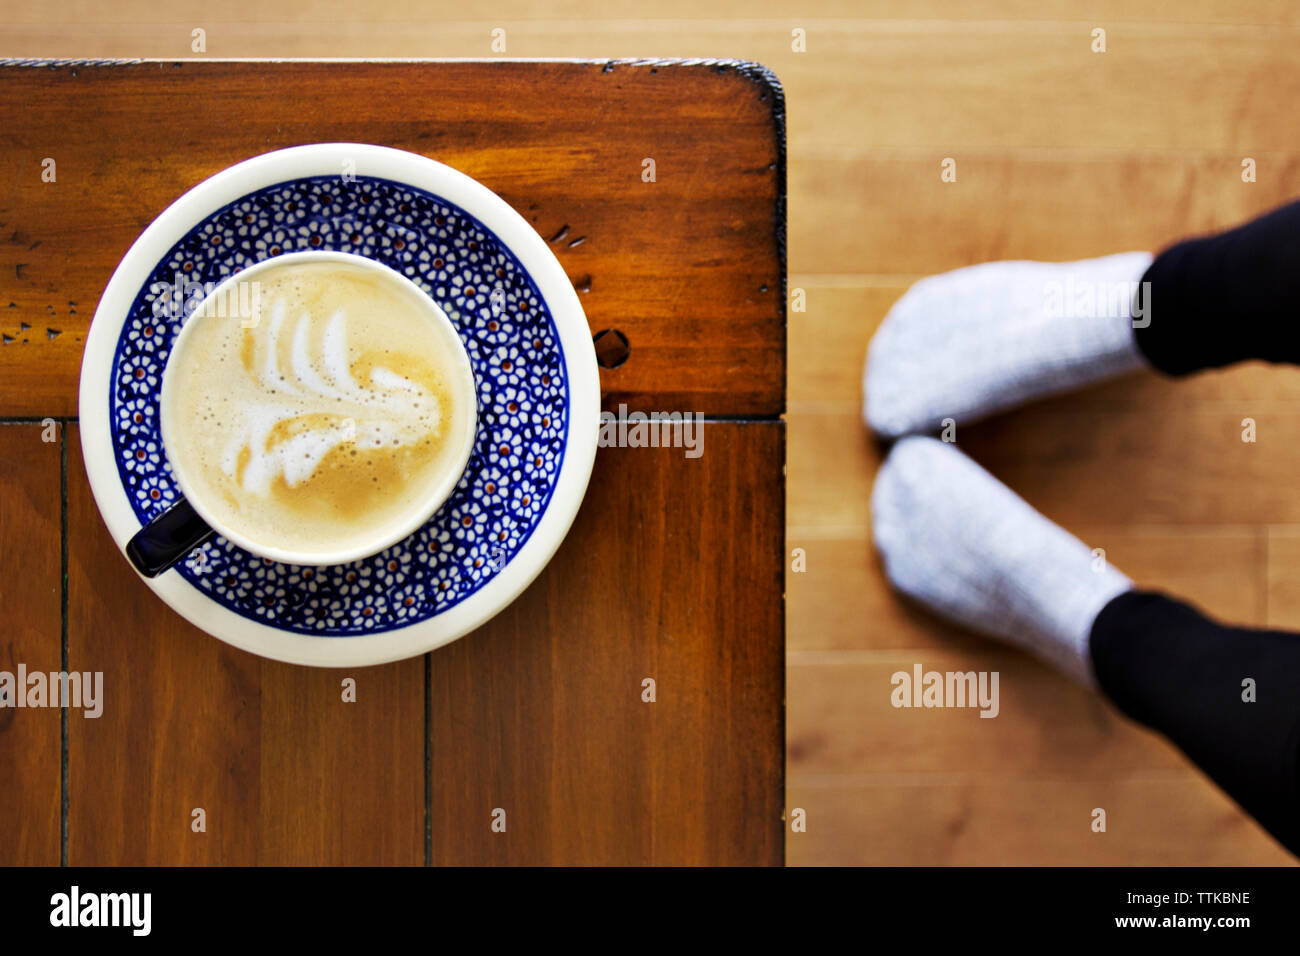 Overhead view of cappuccino served on wooden table by woman's legs Stock Photo